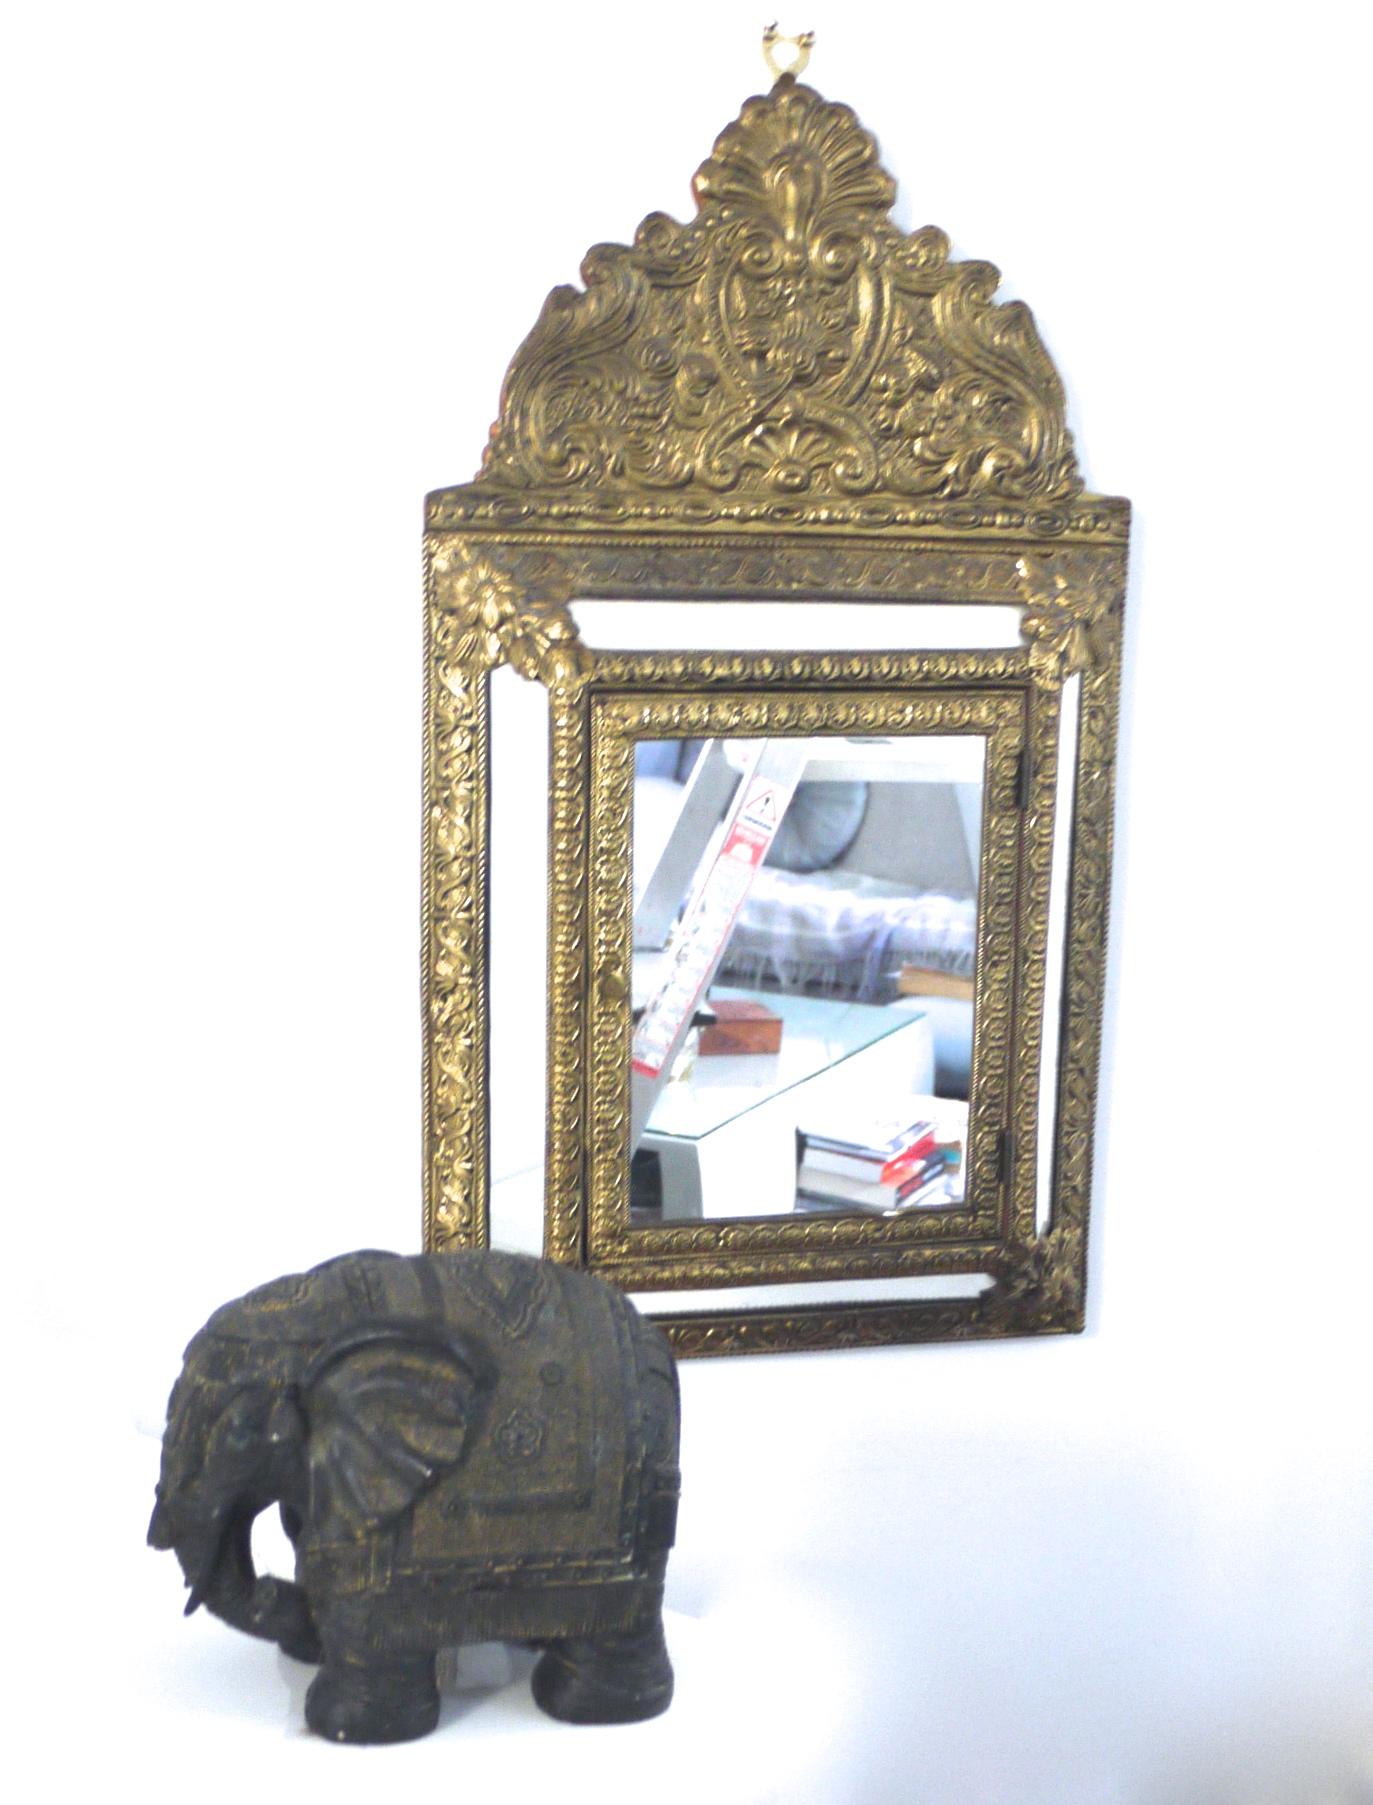 Palmwood Antique Statue, Sculpture of African Elephant Wood with Detail Overlay For Sale